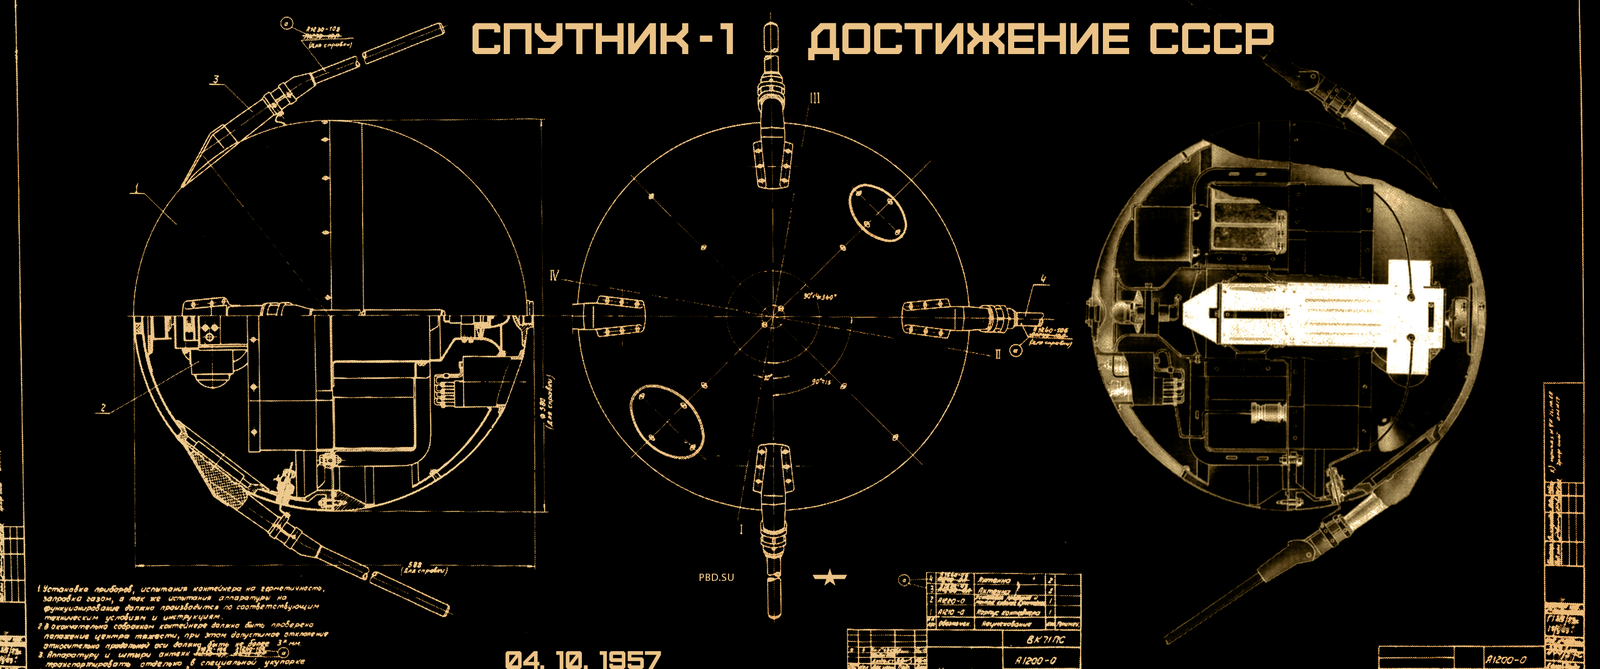 The first artificial earth satellite - My, the USSR, date, Politics, Satellite, Space